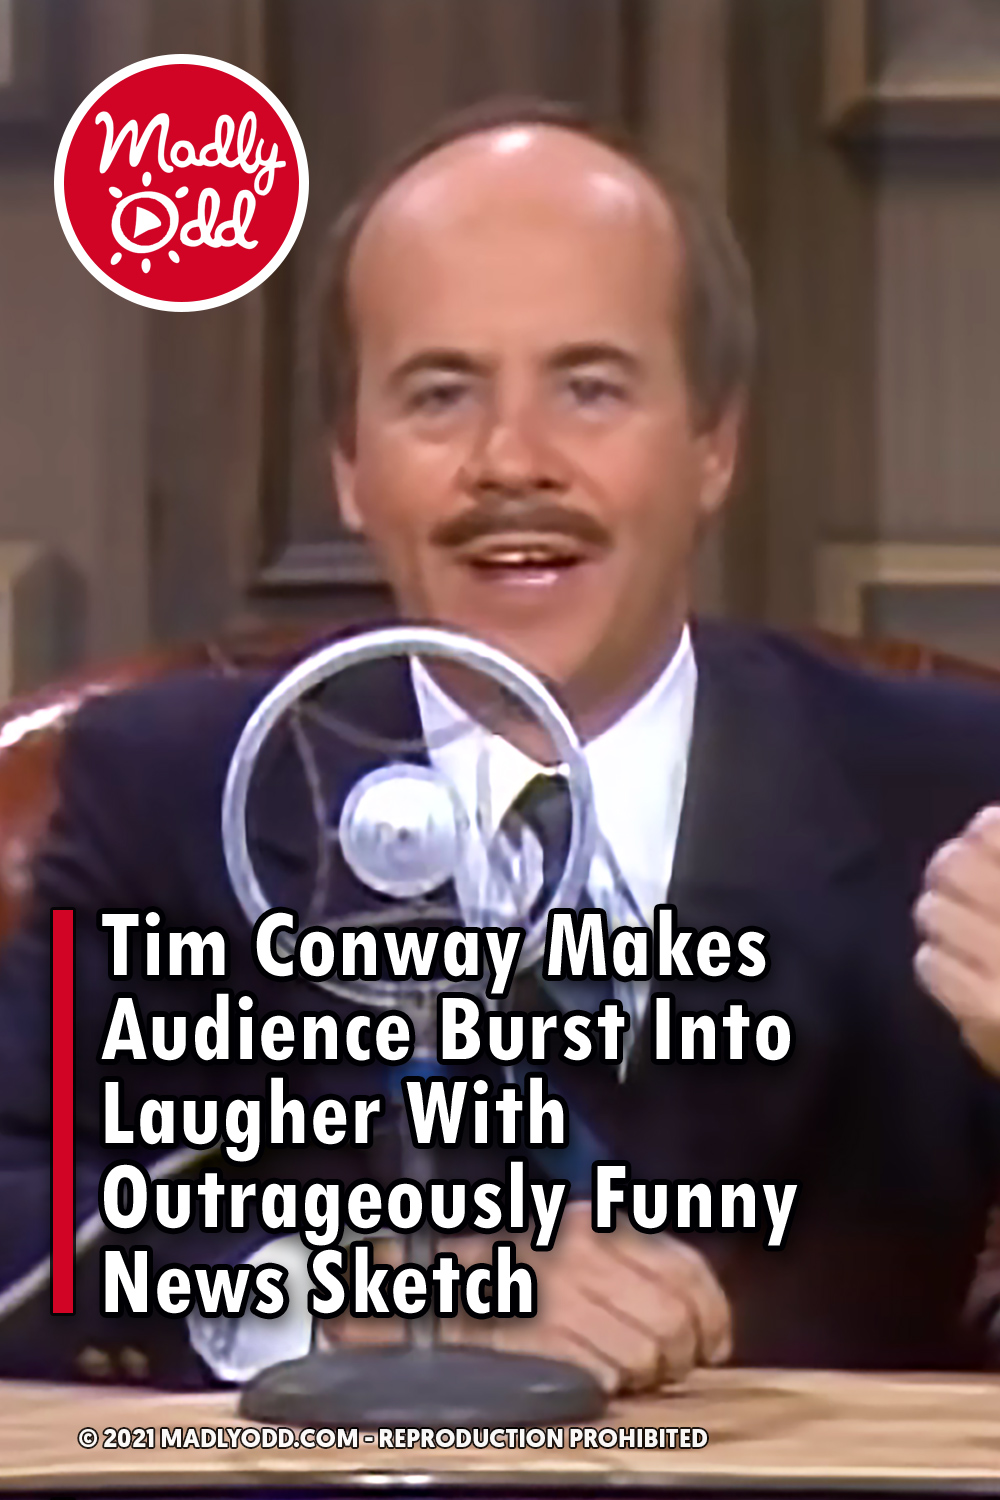 Tim Conway Makes Audience Burst Into Laugher With Outrageously Funny News Sketch